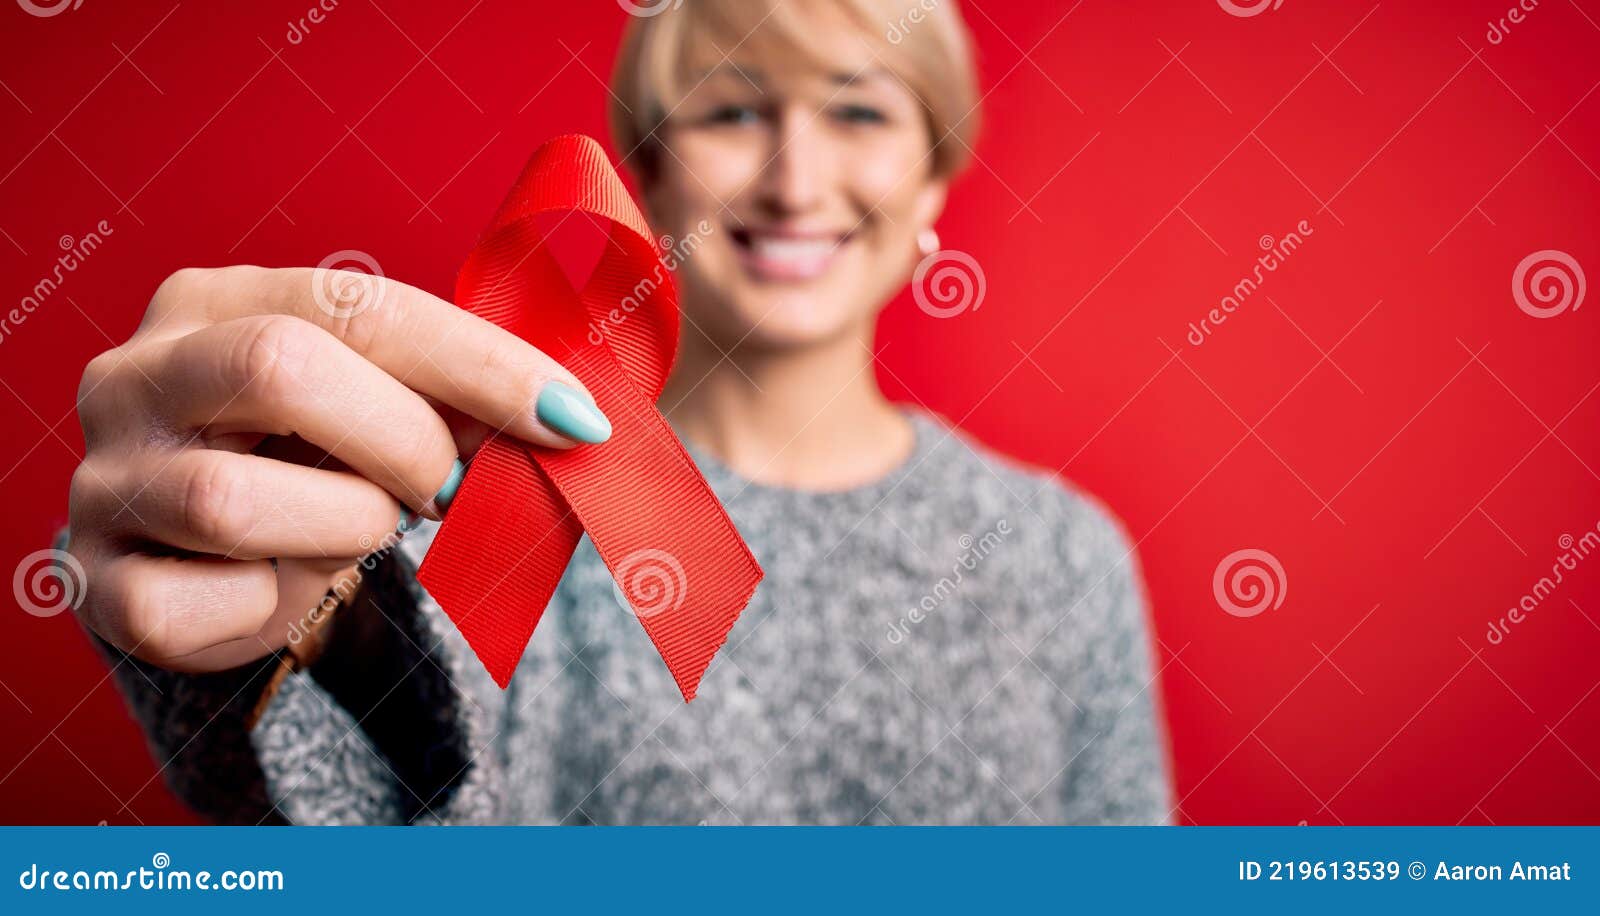 Blonde Hair and HIV: Dispelling the Myths - wide 5